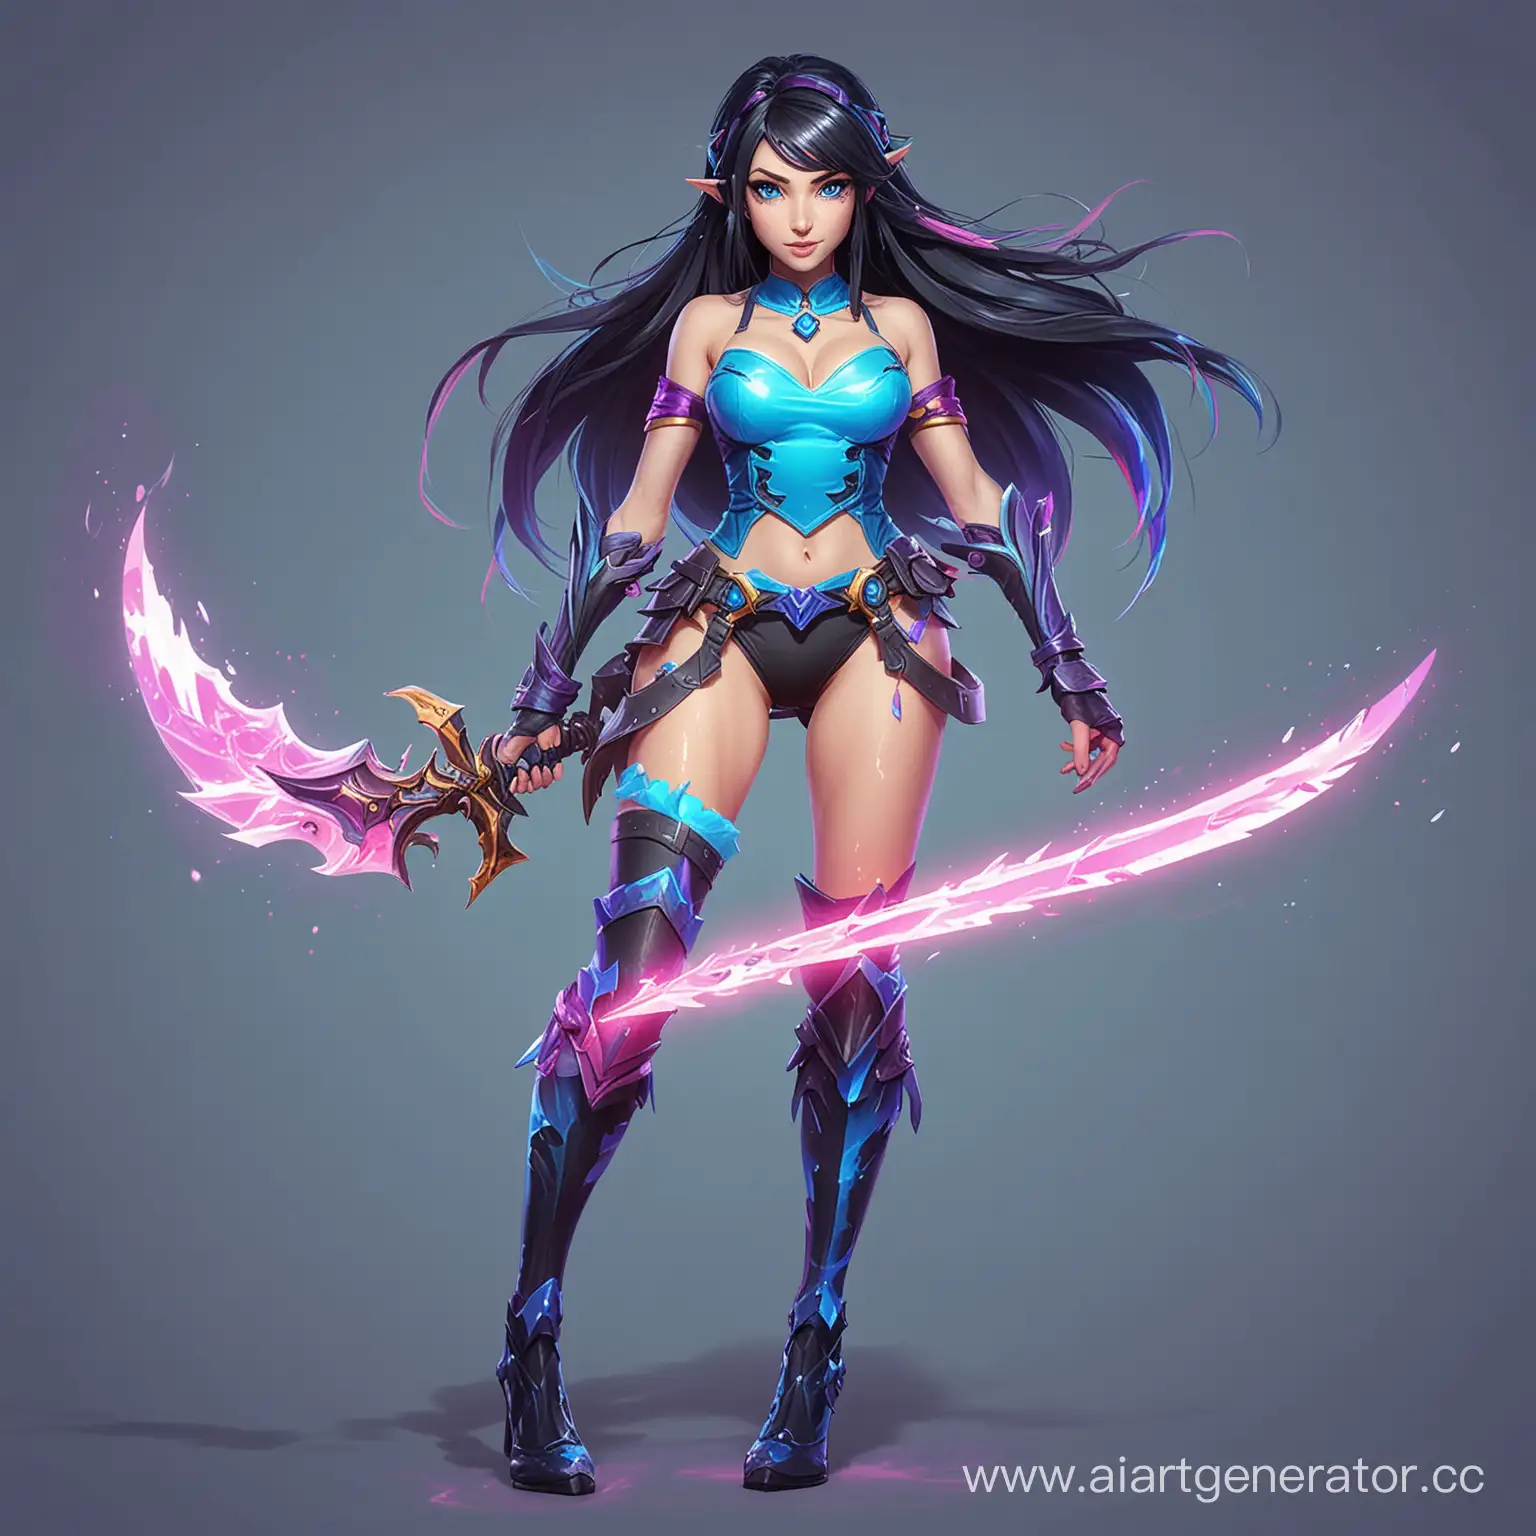 Magical-League-of-Legends-Girl-with-Neon-Blade-in-Cartoonish-Style